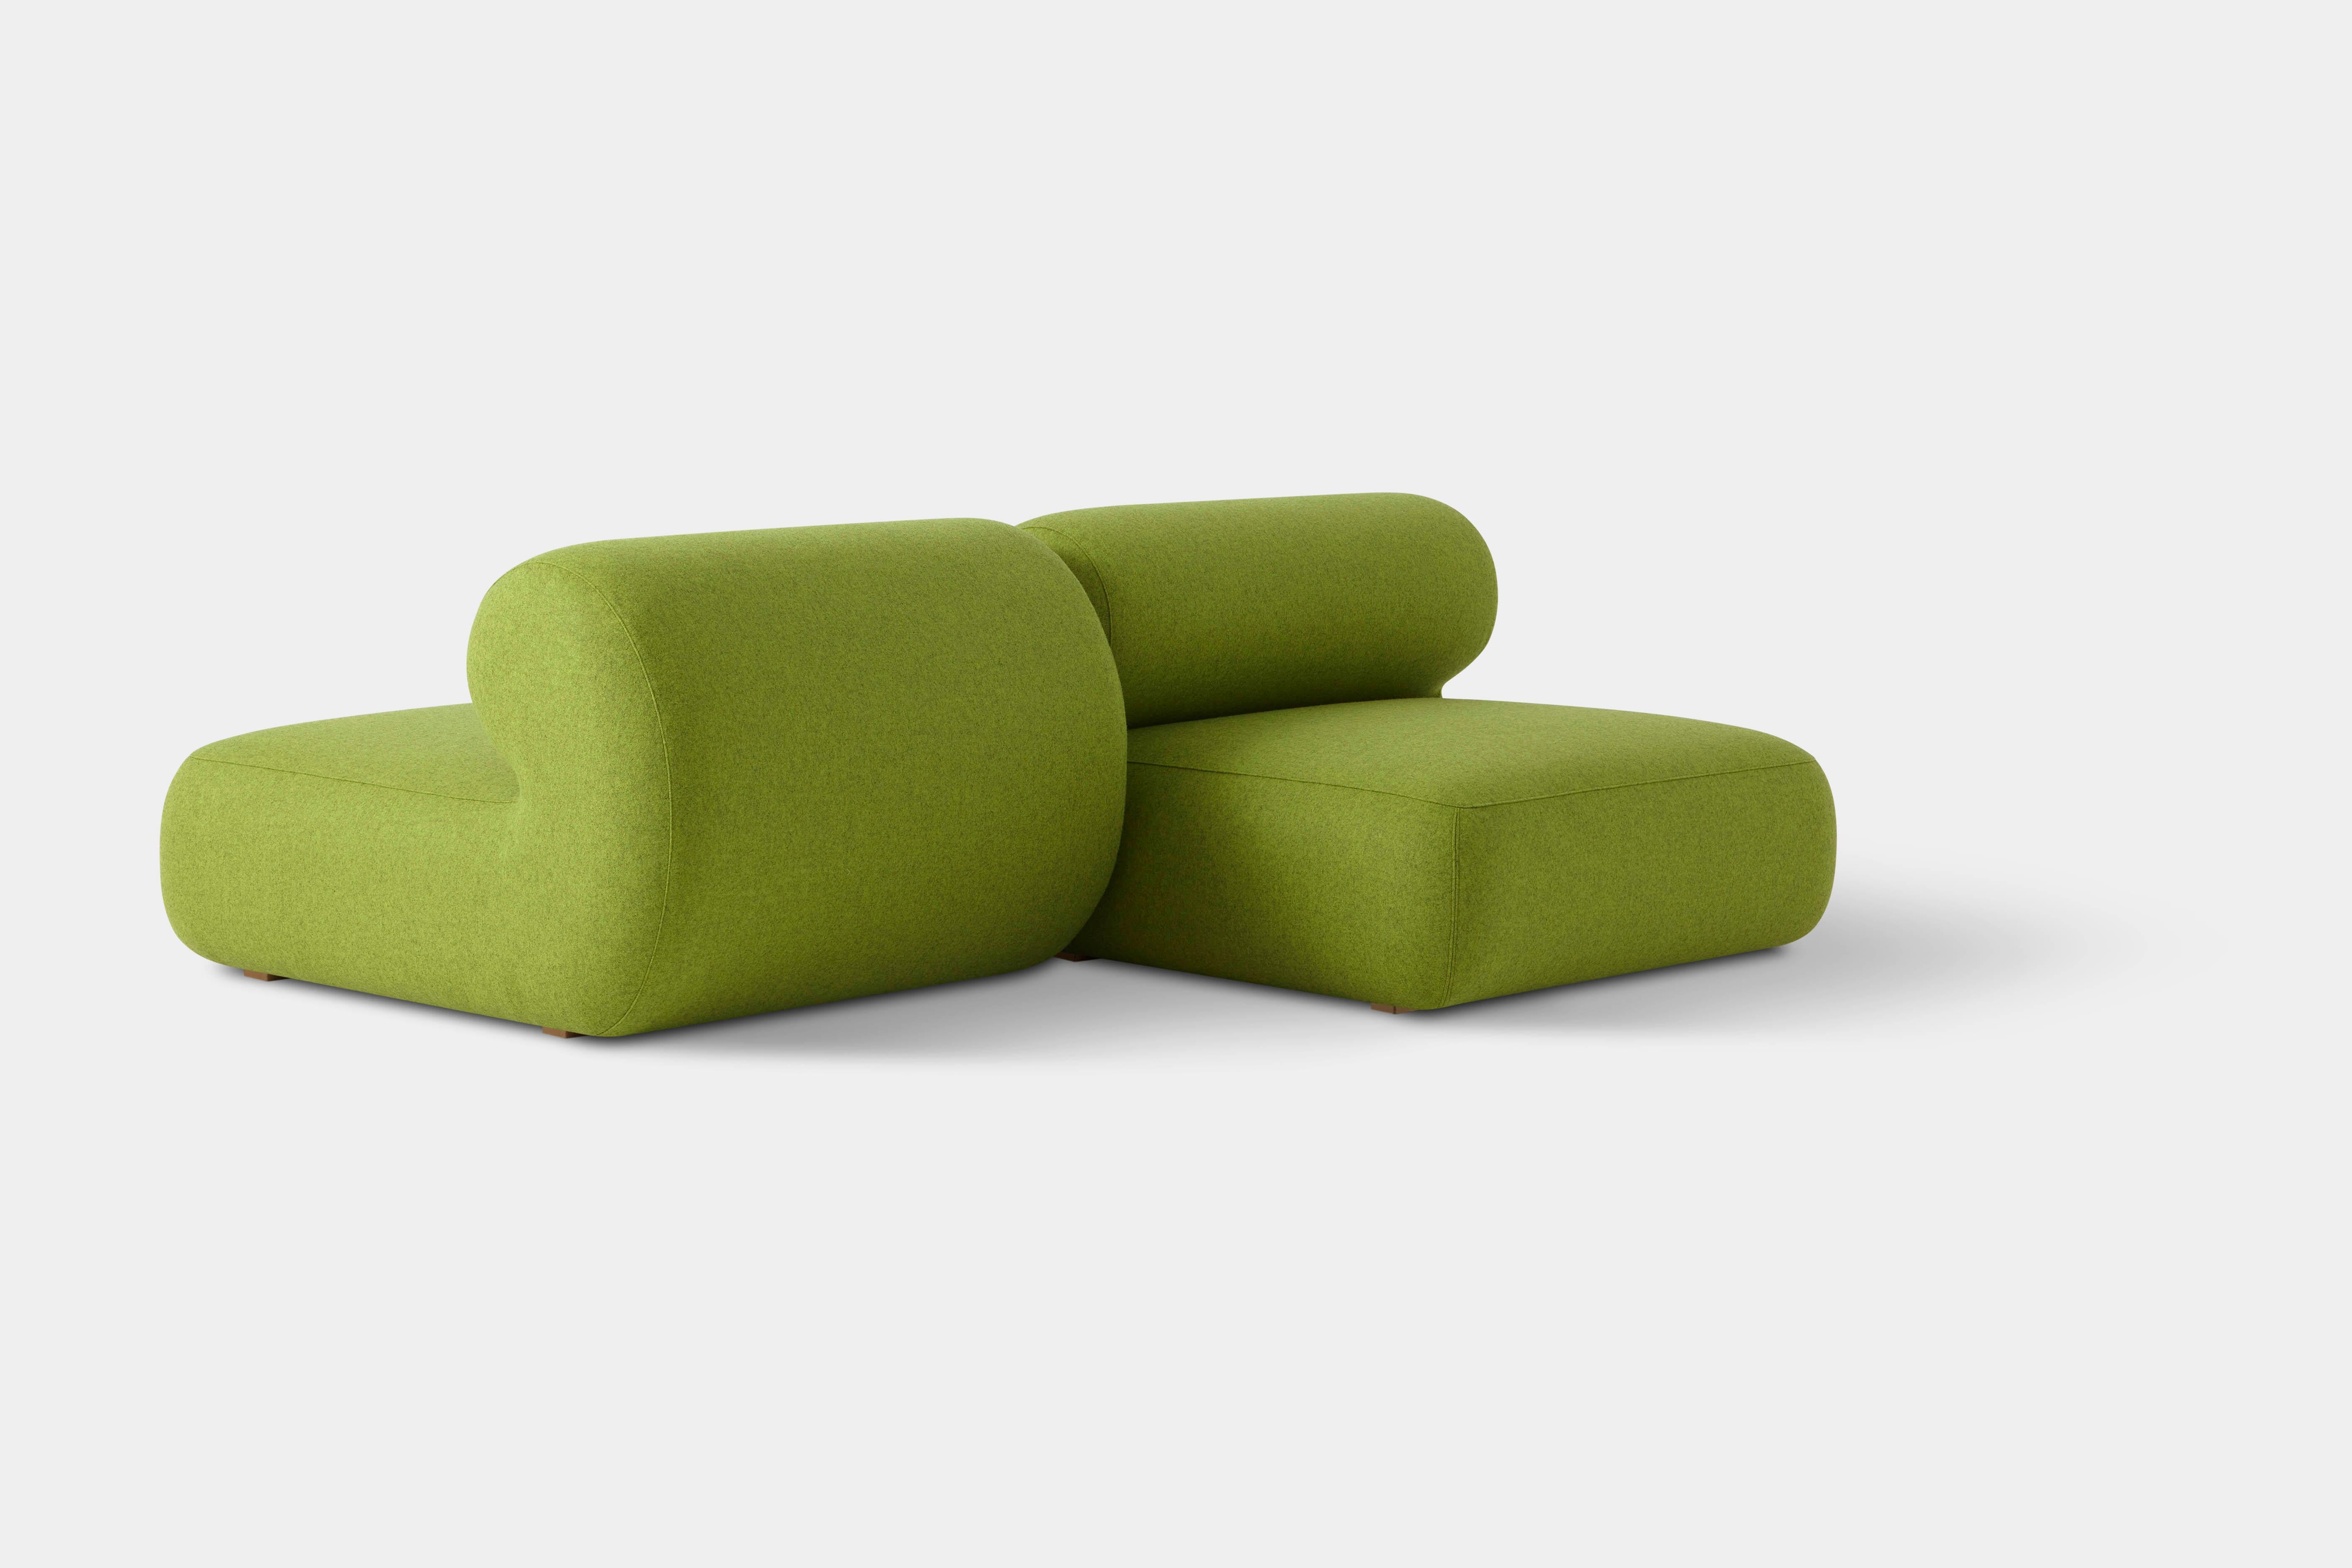 Green Set of 2 Michelin Straight Module by Pepe Albargues
Dimensions: W 103 x D 113 x H 71 cm
Materials: Pinewood, plywood and tablex structure.
Foam CMHR (high resilience and flame retardant) for all our cushion filling systems.
Lacquered beech